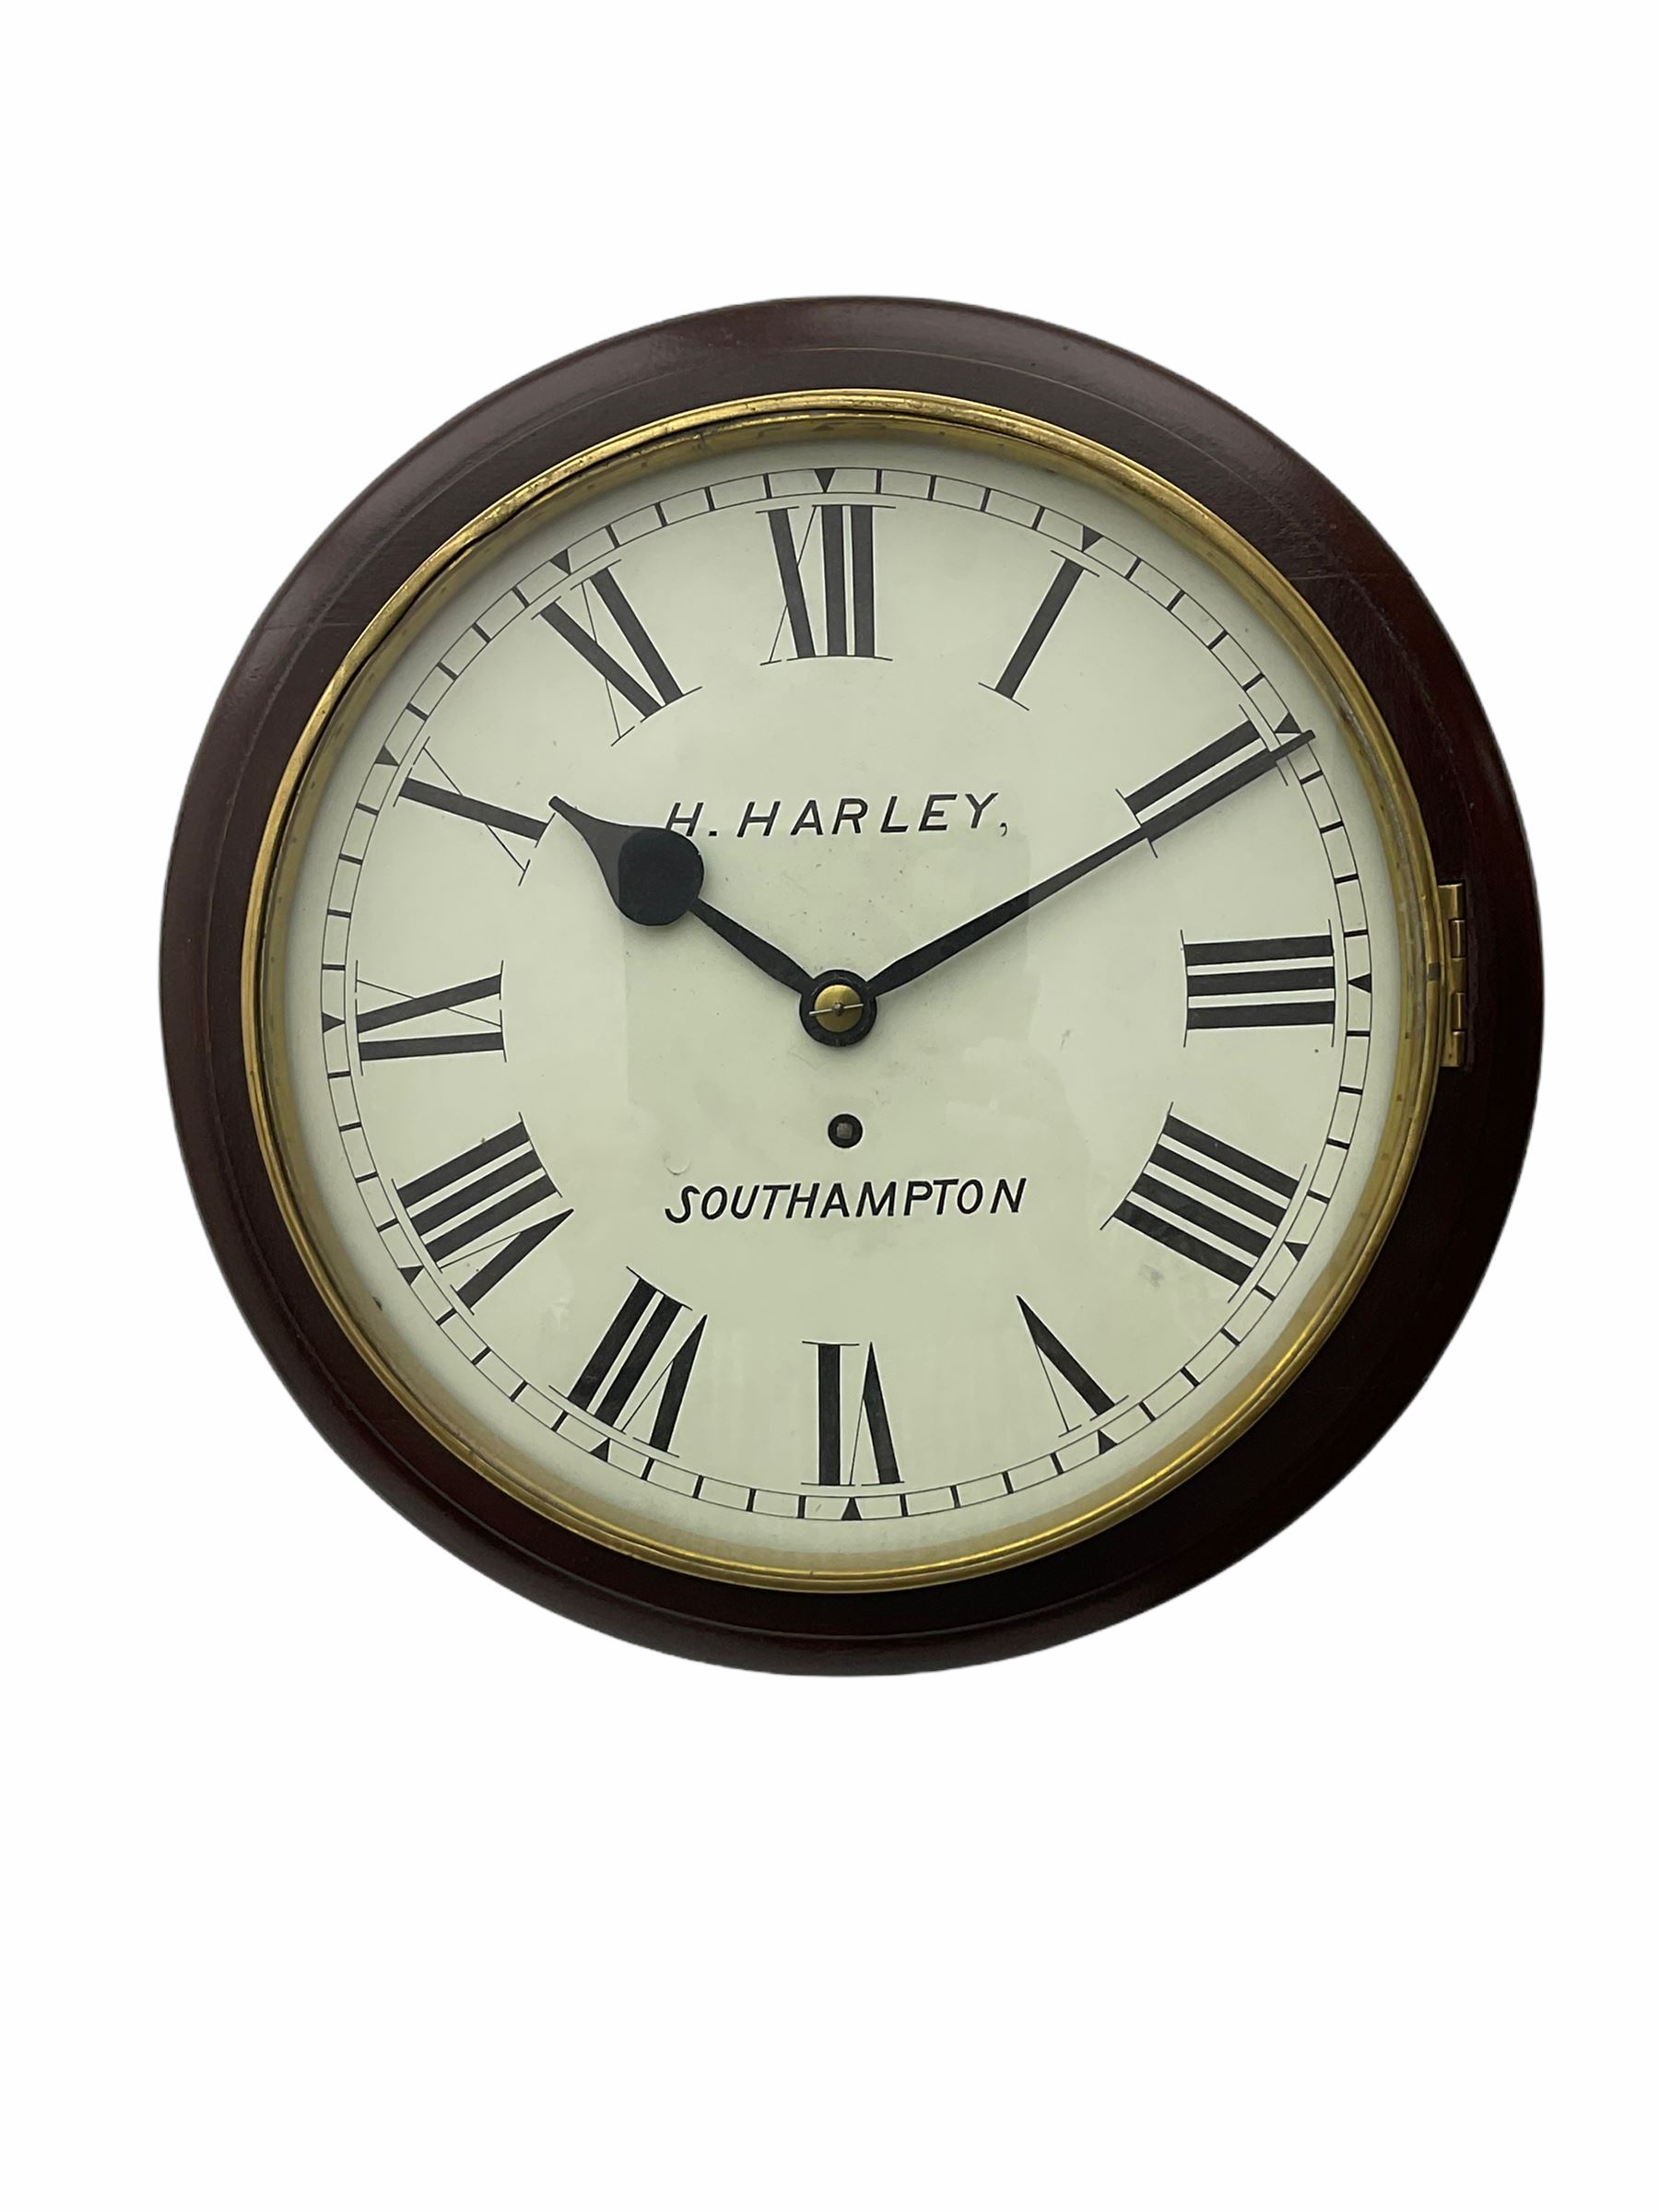 Wall clock with a 12-inch dial and spun brass bezel